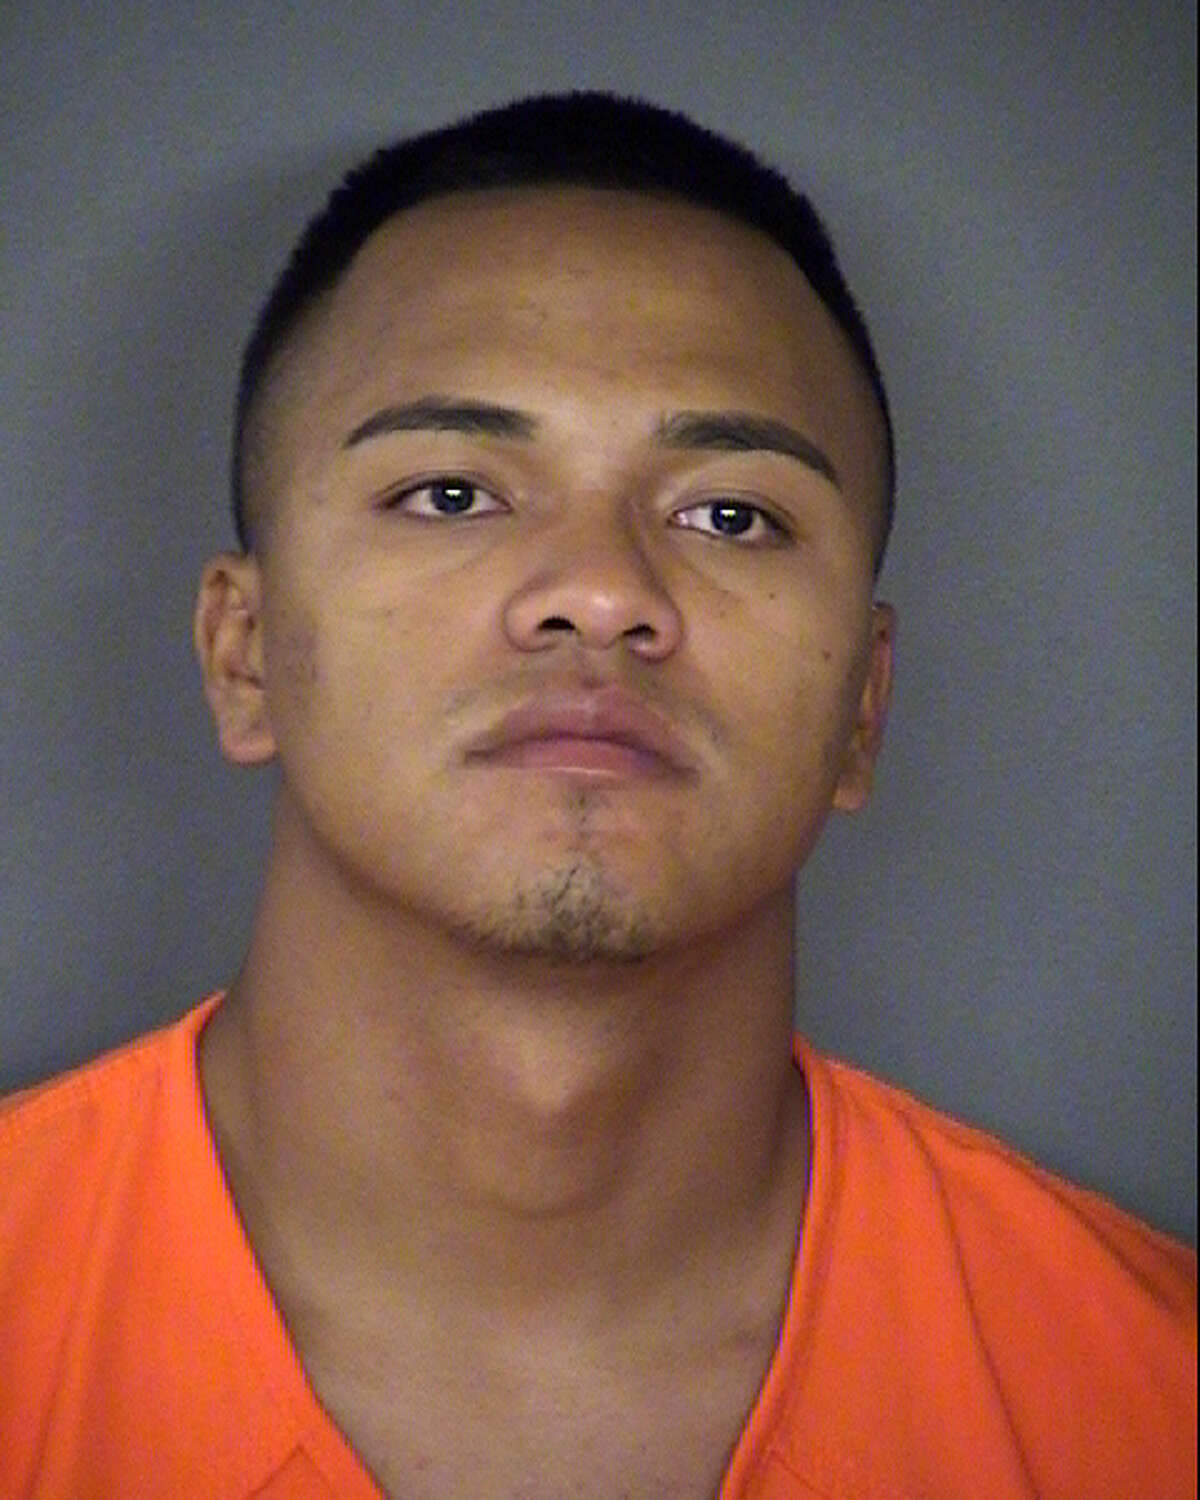 Adrian Romo, 20, now faces a charge of unlawful disclosure of intimate visual material and assault causing bodily injury. He remains in the Bexar County Jail on a $31,500 bond.